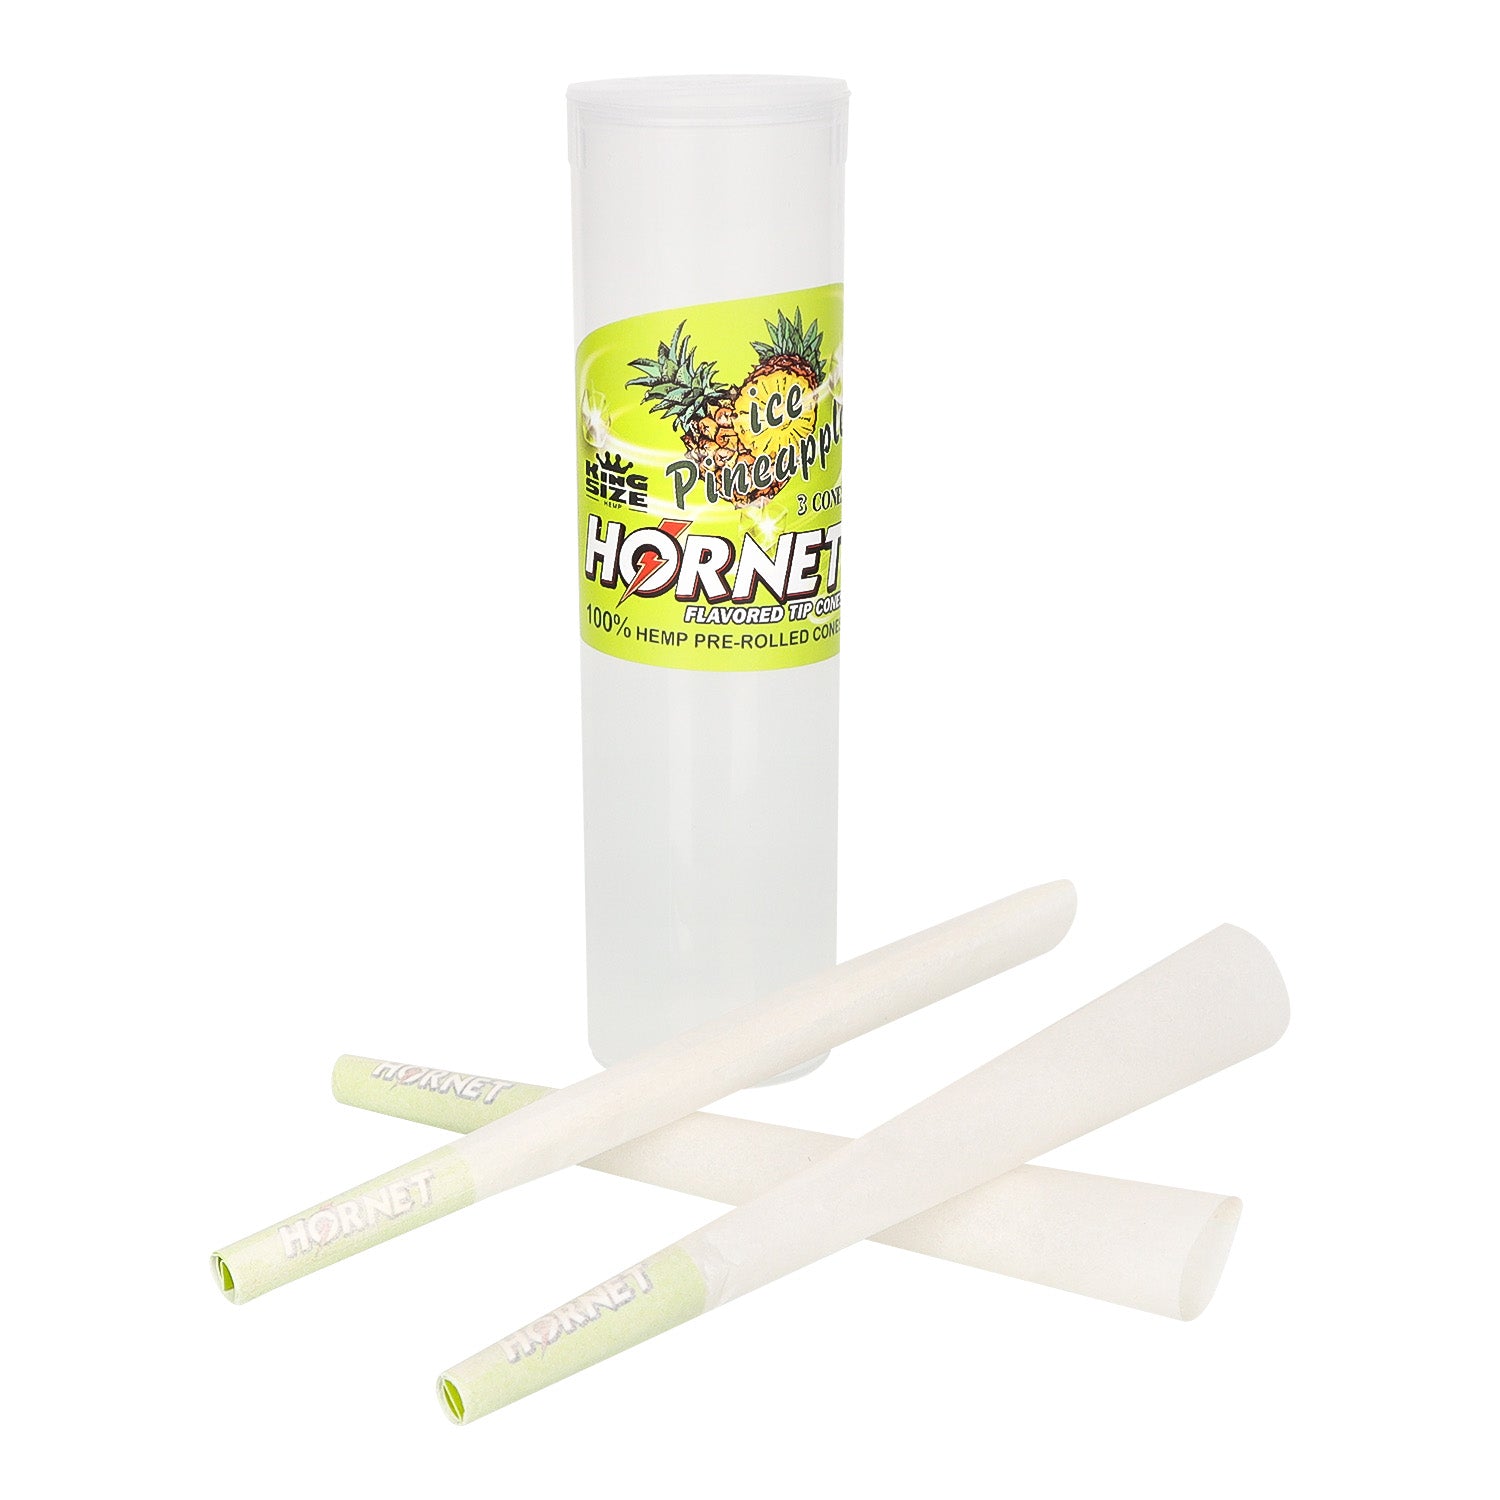 HORNET Pineapple Flavors Pre Rolled Cones, King Size Pre Rolled Rolling Paper With Tips, Slow Burning Rolling Cones & Flavored Pop, 3 PCS / Tube, 12 Tubes / Box